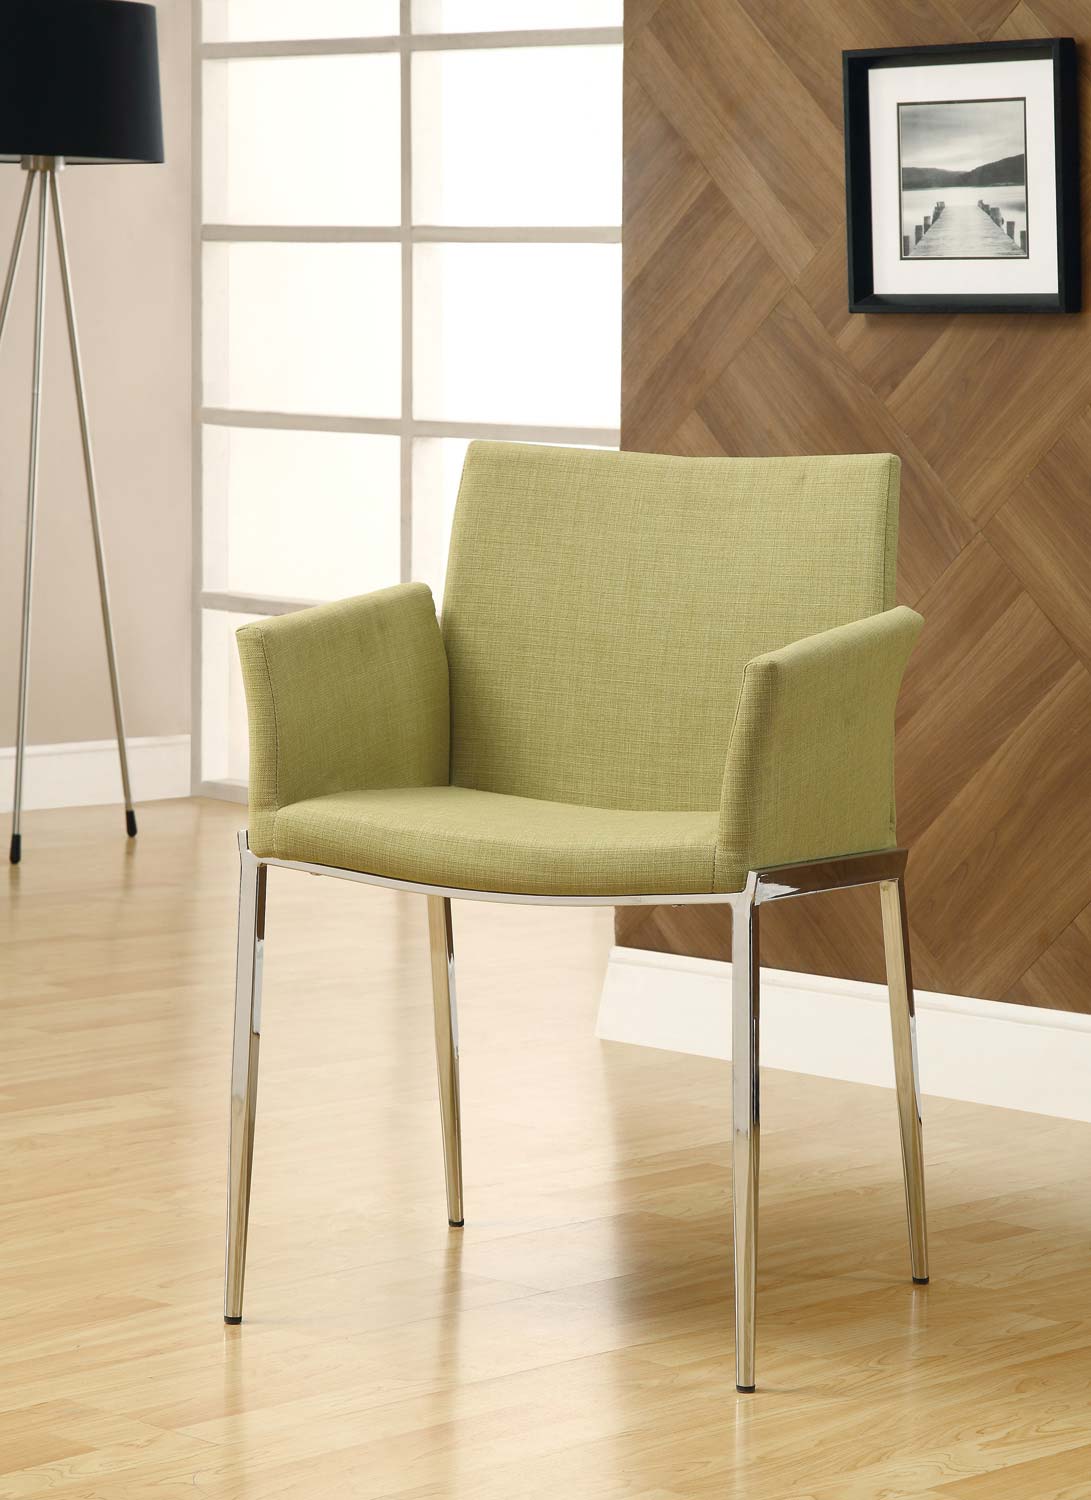 Coaster Mix & Match Dining Chair - Pear